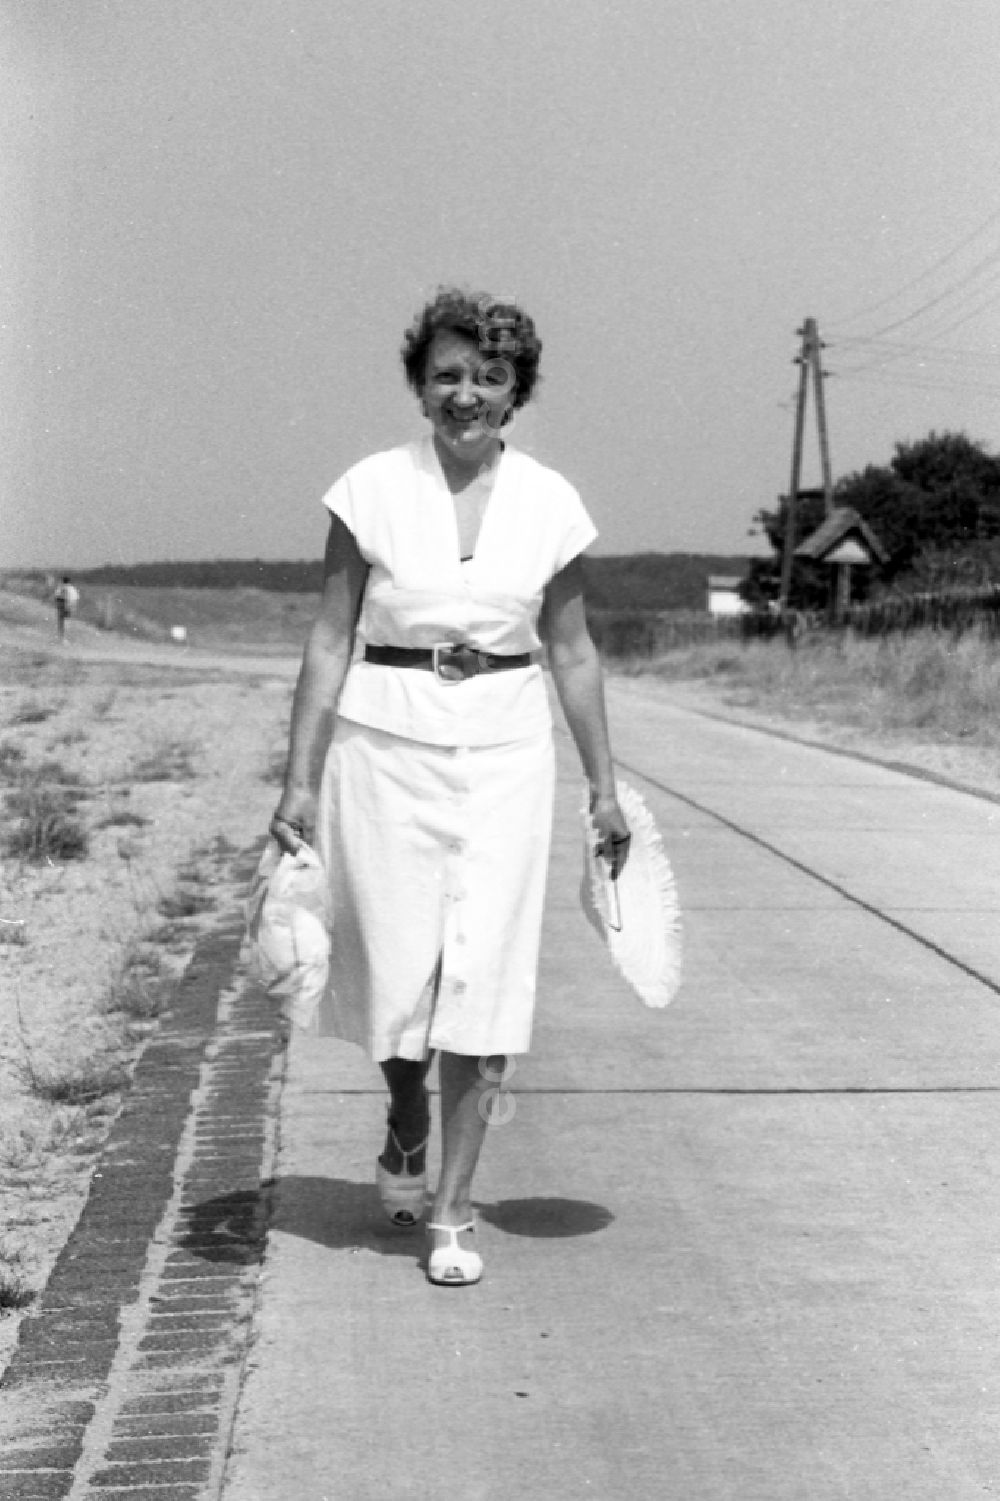 Bansin: A woman strolls on the seafront in Bansin in the federal state Mecklenburg-West Pomerania in the area of the former GDR, German democratic republic